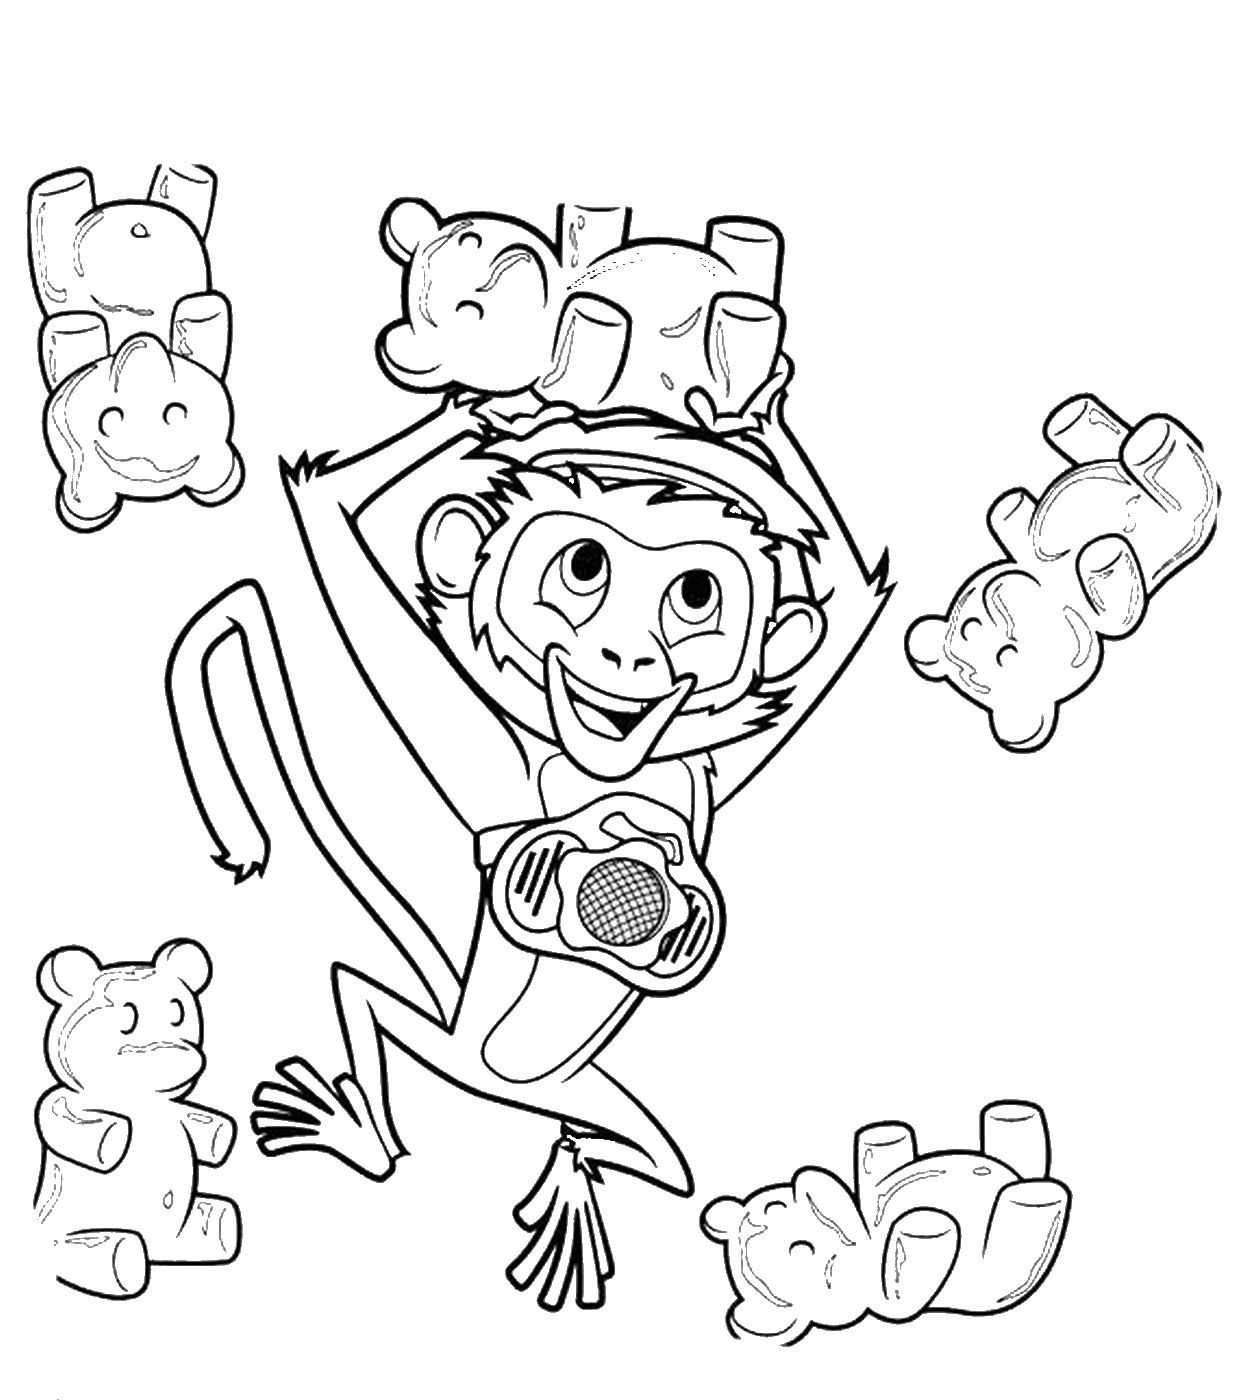 cloudy-with-a-chance-of-meatballs-coloring-pages | Free Coloring ...